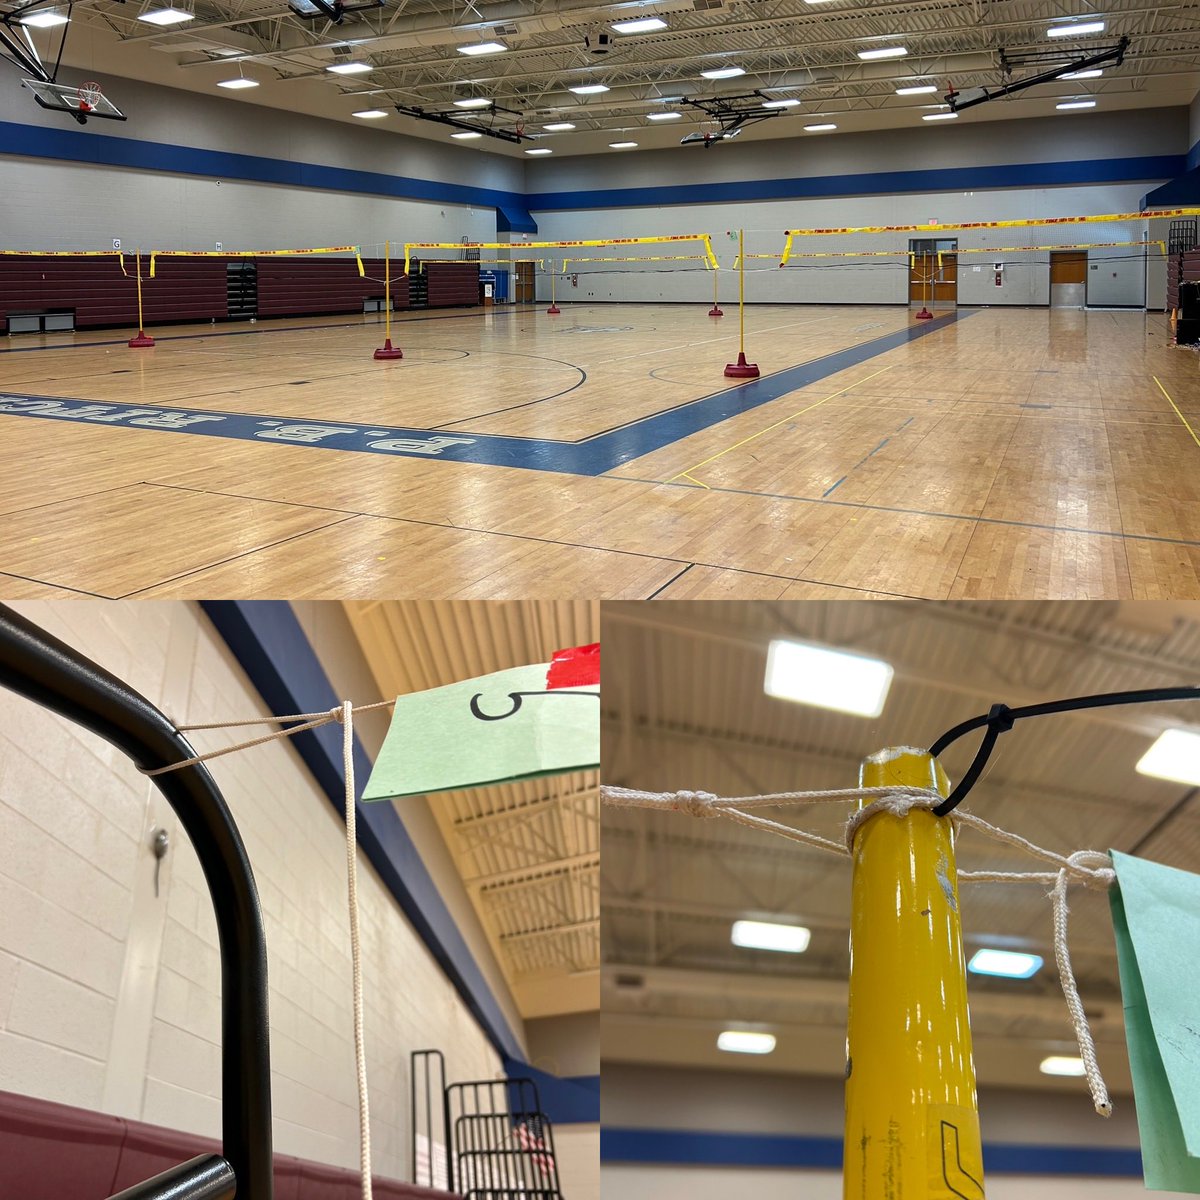 Wanted to share my VBALL net set up! I run nets from bleacher to bleacher using poachers knot loops for easy setup and take down. Zip ties hold loops in place. 8 - 20ft courts accommodate 96 kiddos #worksinMSPEtoo
#physed #iteachpe #makethebestofeveryday
#allkidslovetoplay